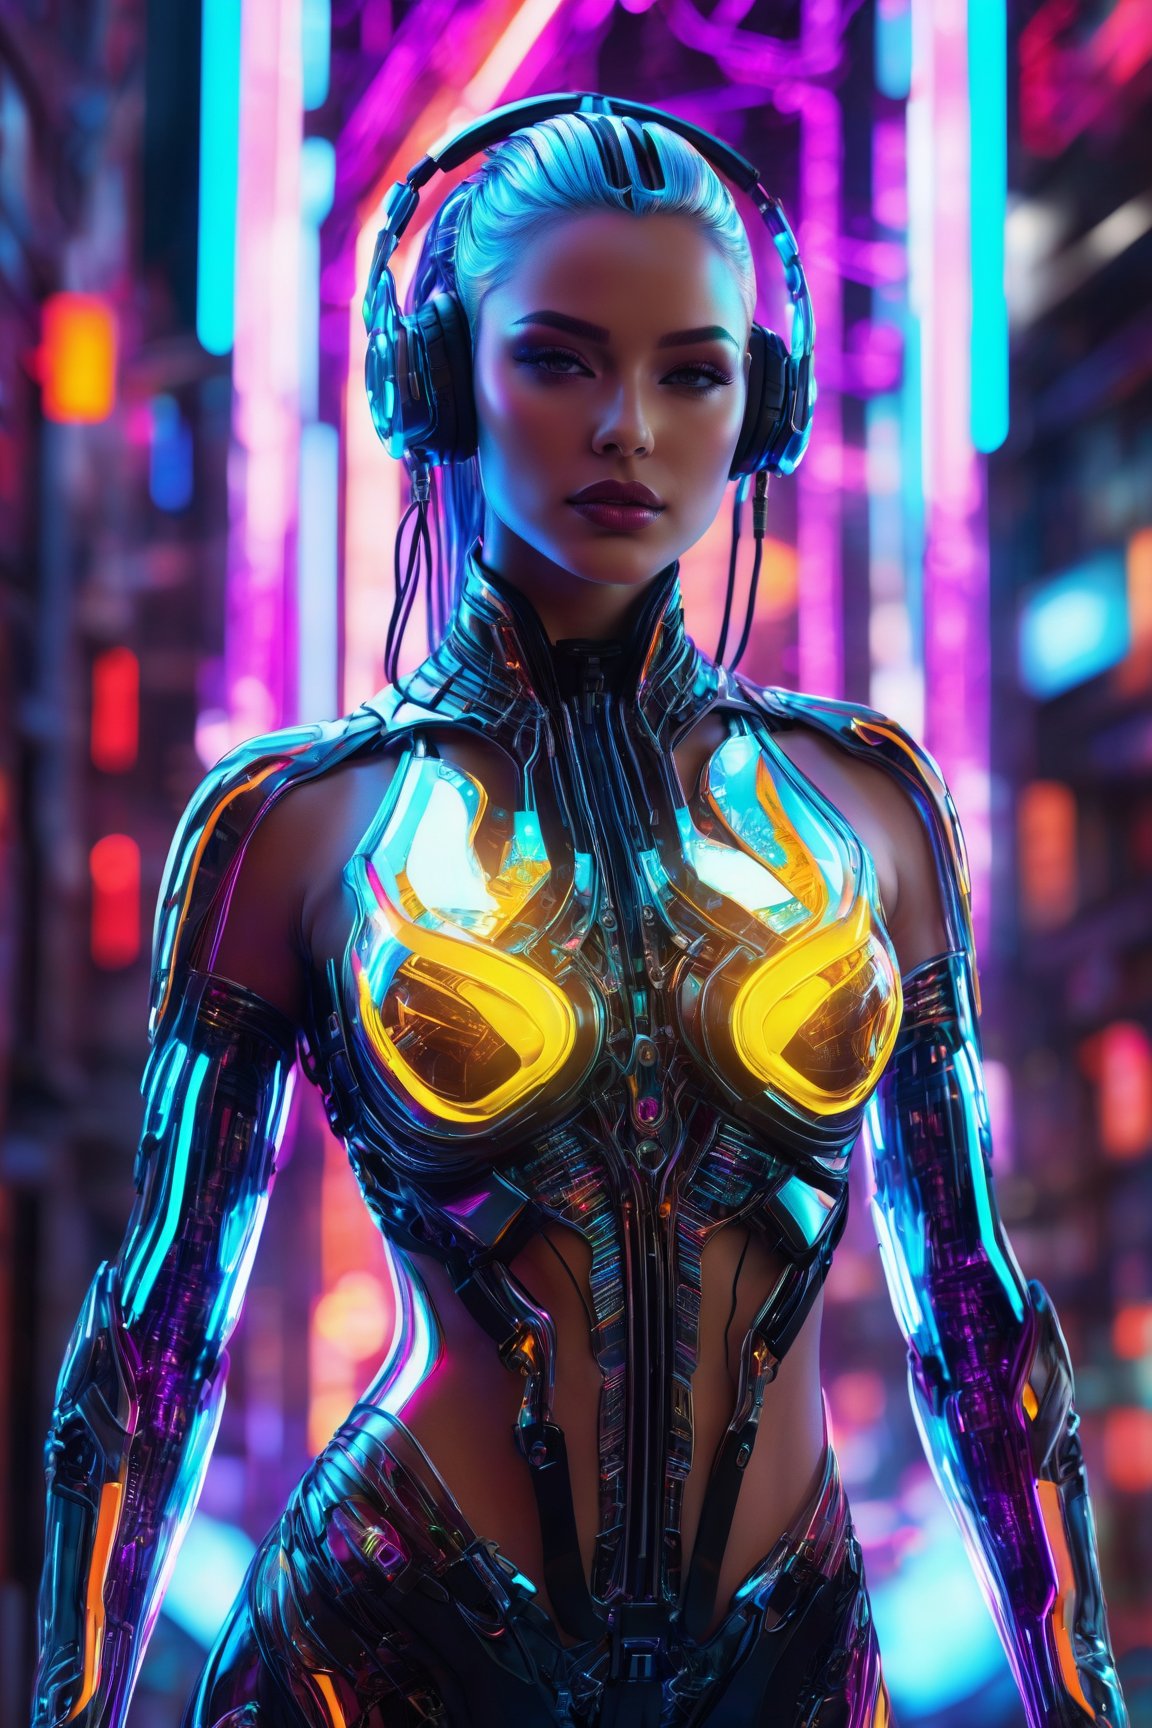 (best quality, 4k, 8k, highres, masterpiece:1.2),  ultra-detailed,  (realistic, photorealistic, photo-realistic:1.37),  cyborg woman,  transparent rib cage made of glass,  neon cables,  gears inside the glass body,  glowing circuits,  futuristic mechanical parts,  cybernetic enhancements,  metallic skin,  stunning silver hair flow,  piercing eyes,  high-tech headset,  sleek and angular body,  dynamic pose,  urban background,  neon-lit cityscape,  vibrant colors,  holographic projections,  dramatic lighting,<lora:EMS-262287-EMS:0.800000>